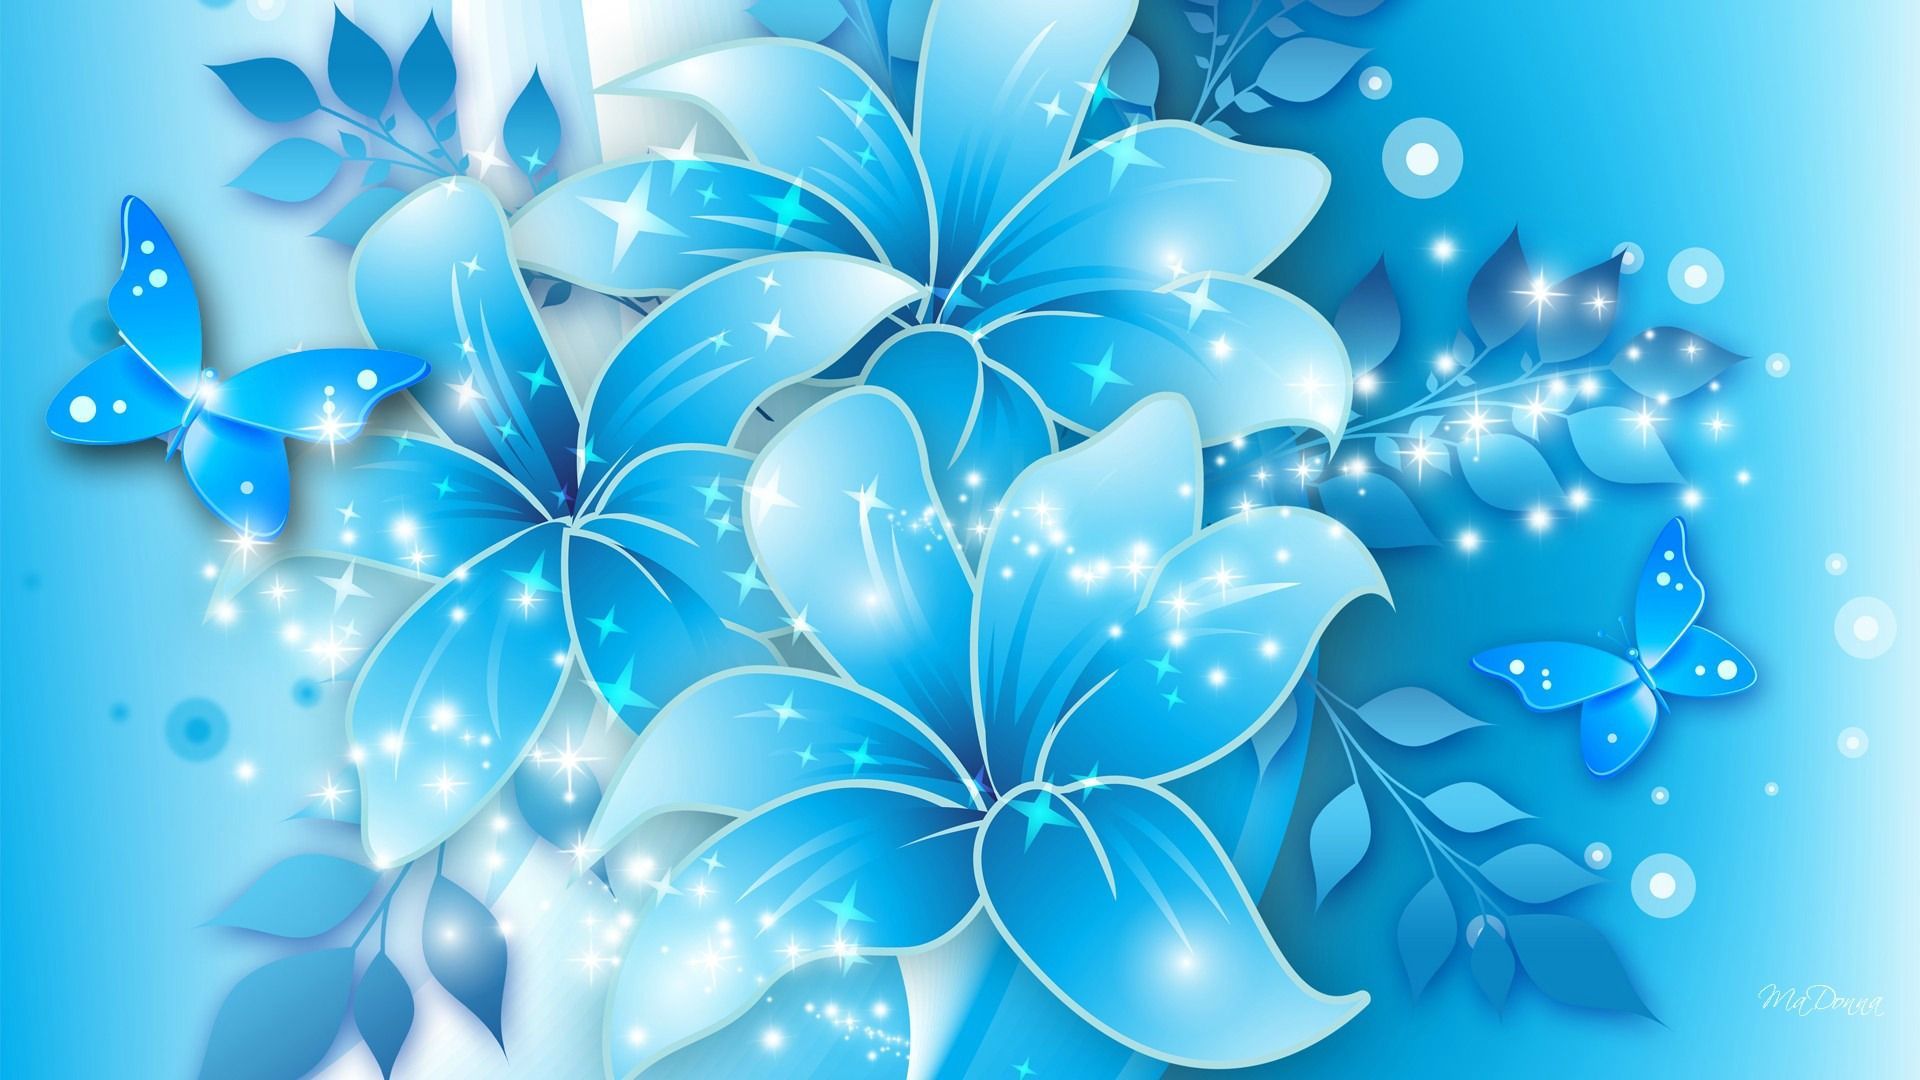 Blue Flower HD Wallpapers - HD Wallpapers Backgrounds of Your Choice